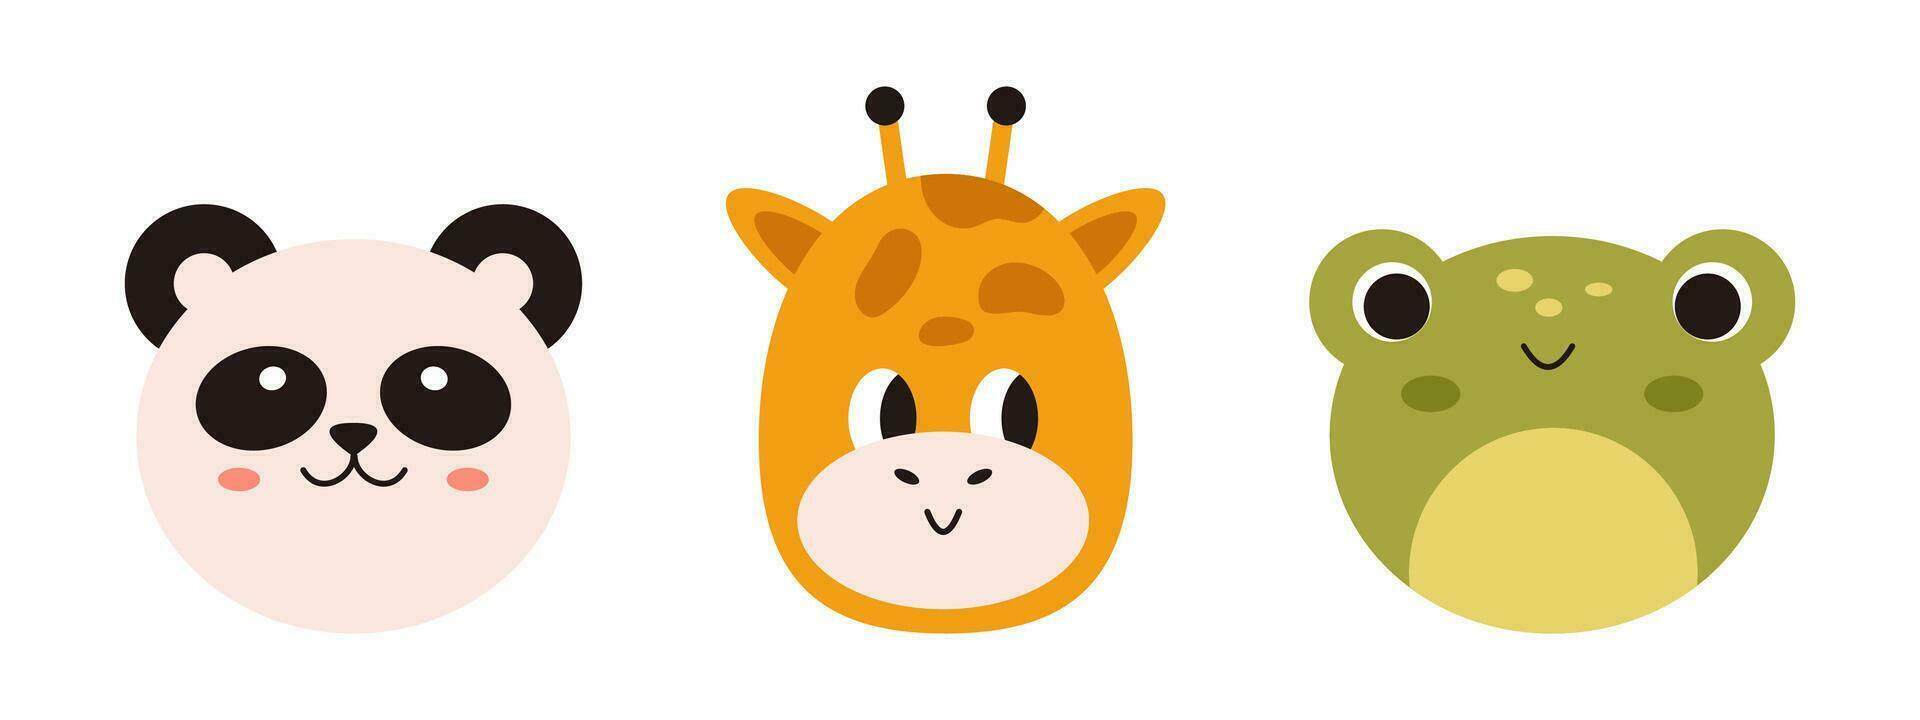 Vector set with kawaii animal faces. Design for kids. Baby frog, panda and giraffe heads. Cute childish smiling animal collection. Funny animals in flat design.